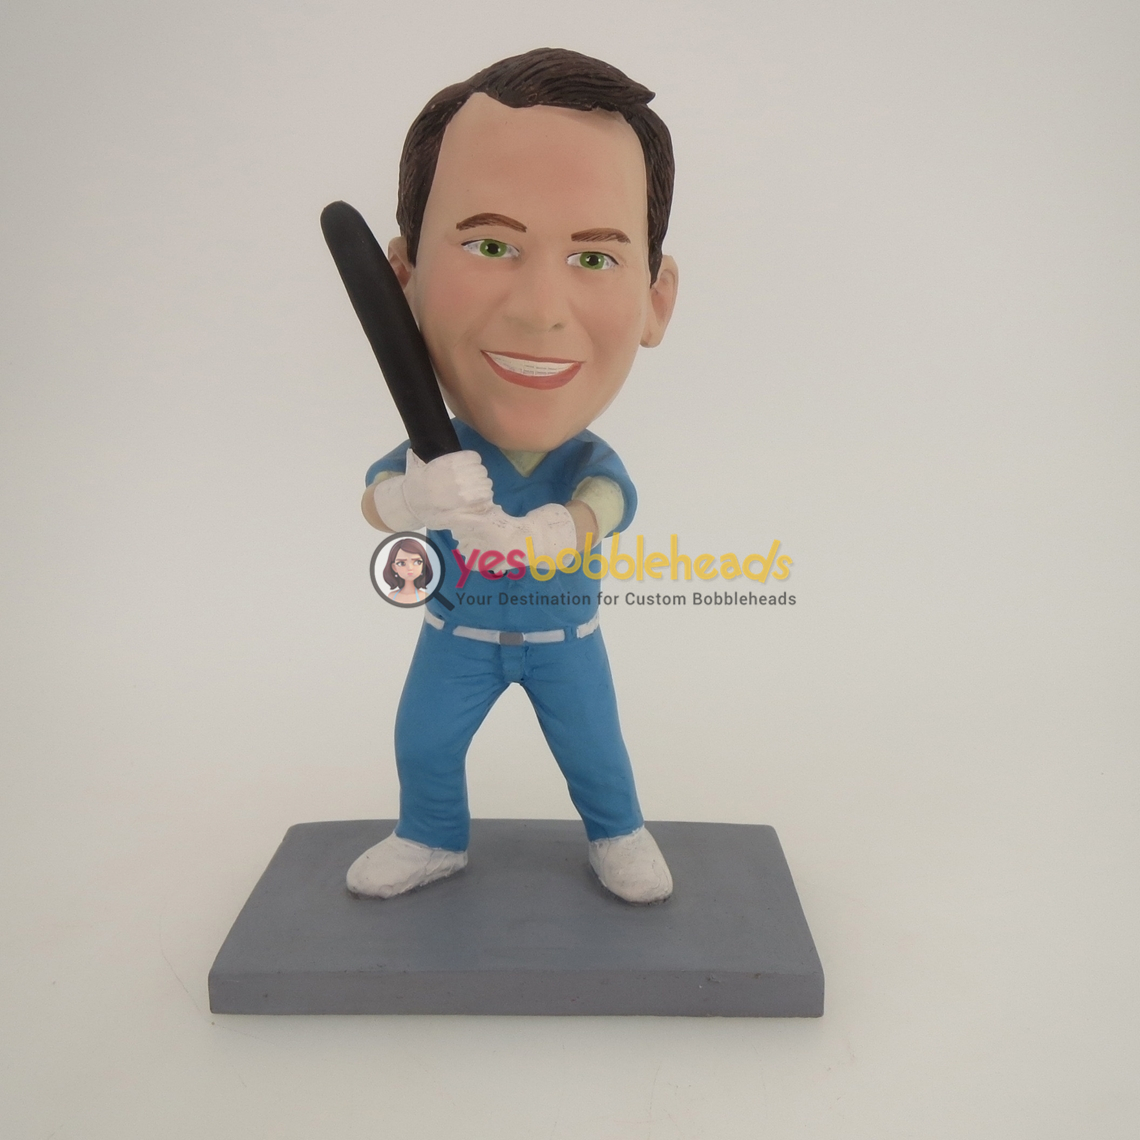 Picture of Custom Bobblehead Doll: Baseball Player Ready To Hit